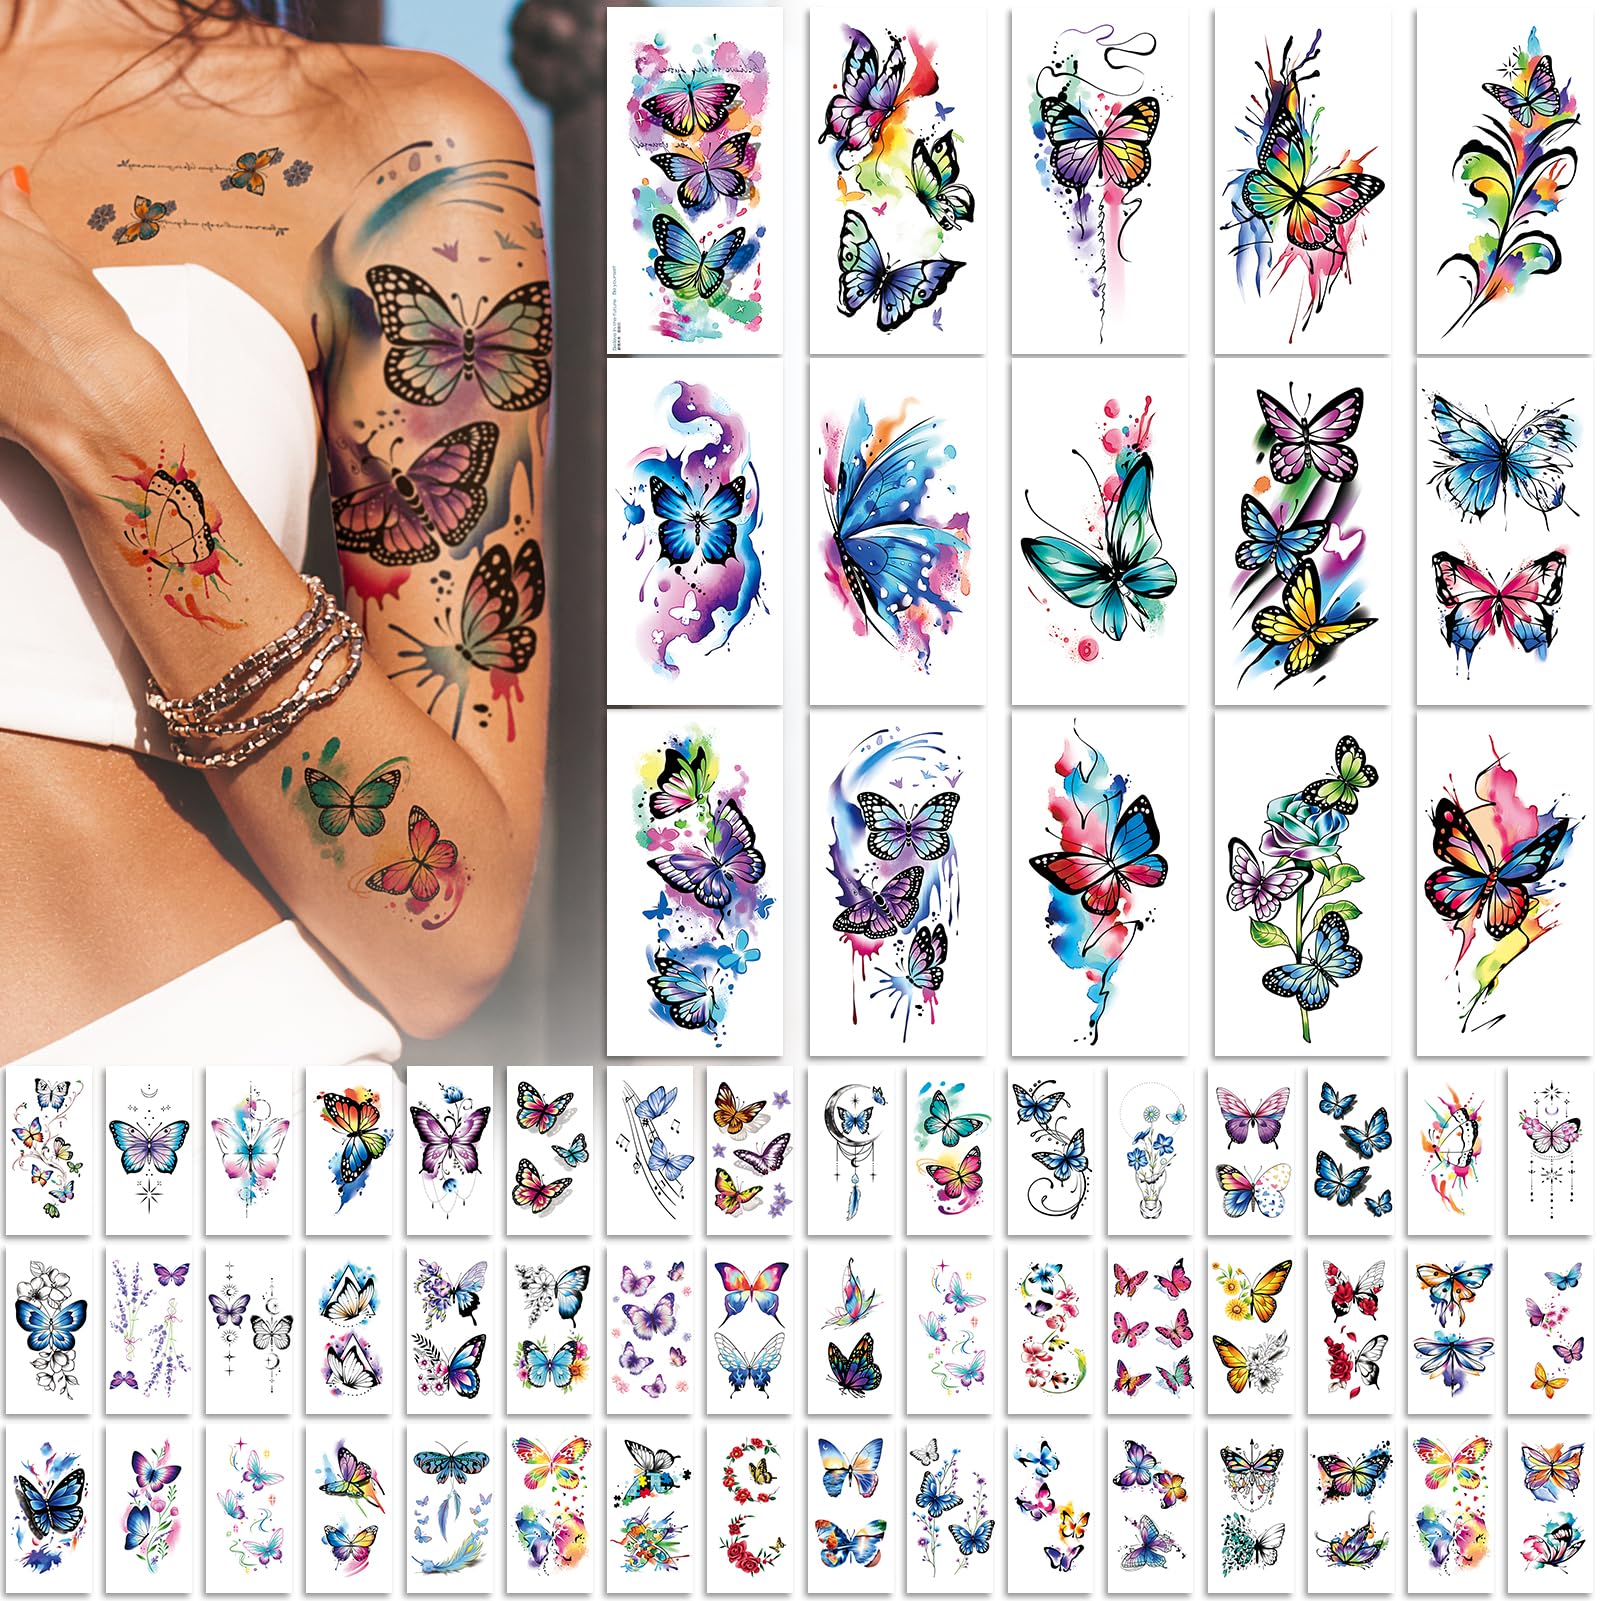 Pediatric Stickers, Patches & Tattoos